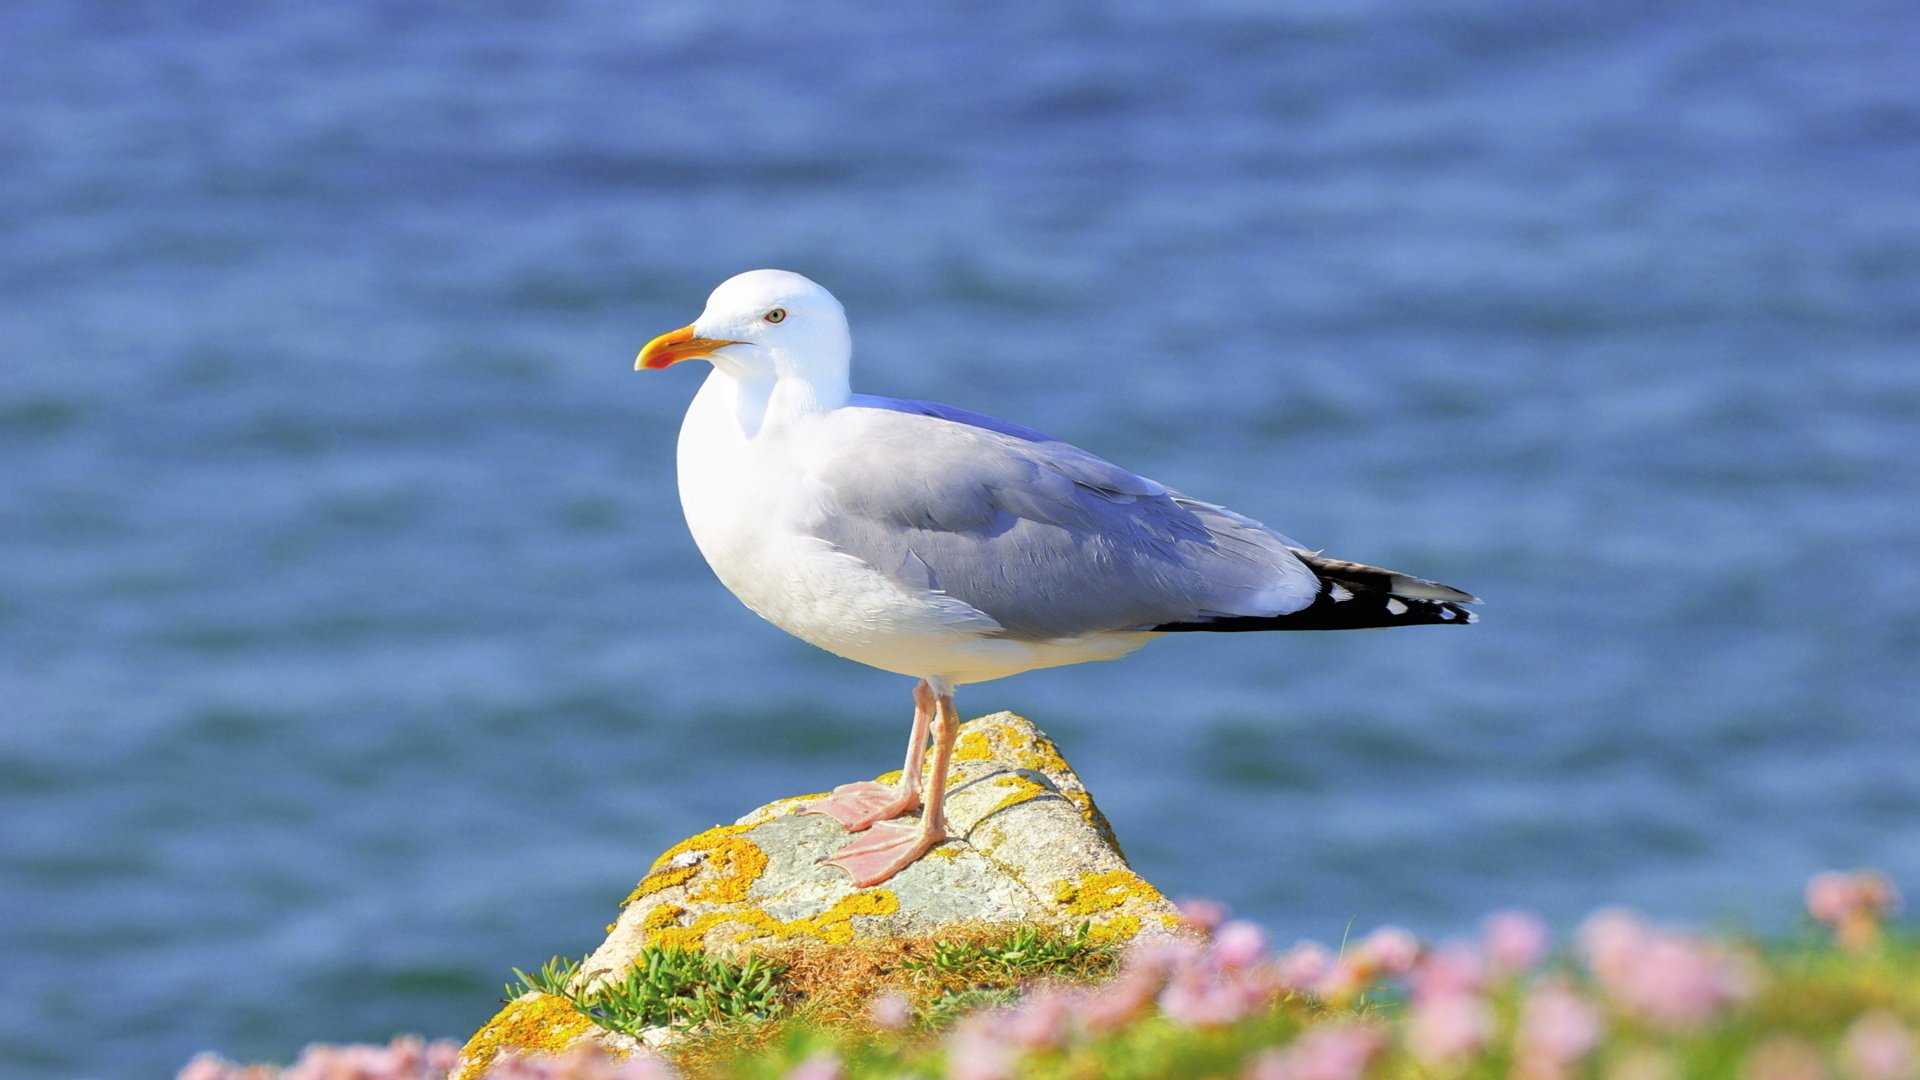 Seagull Wallpapers and Background Images - stmed.net